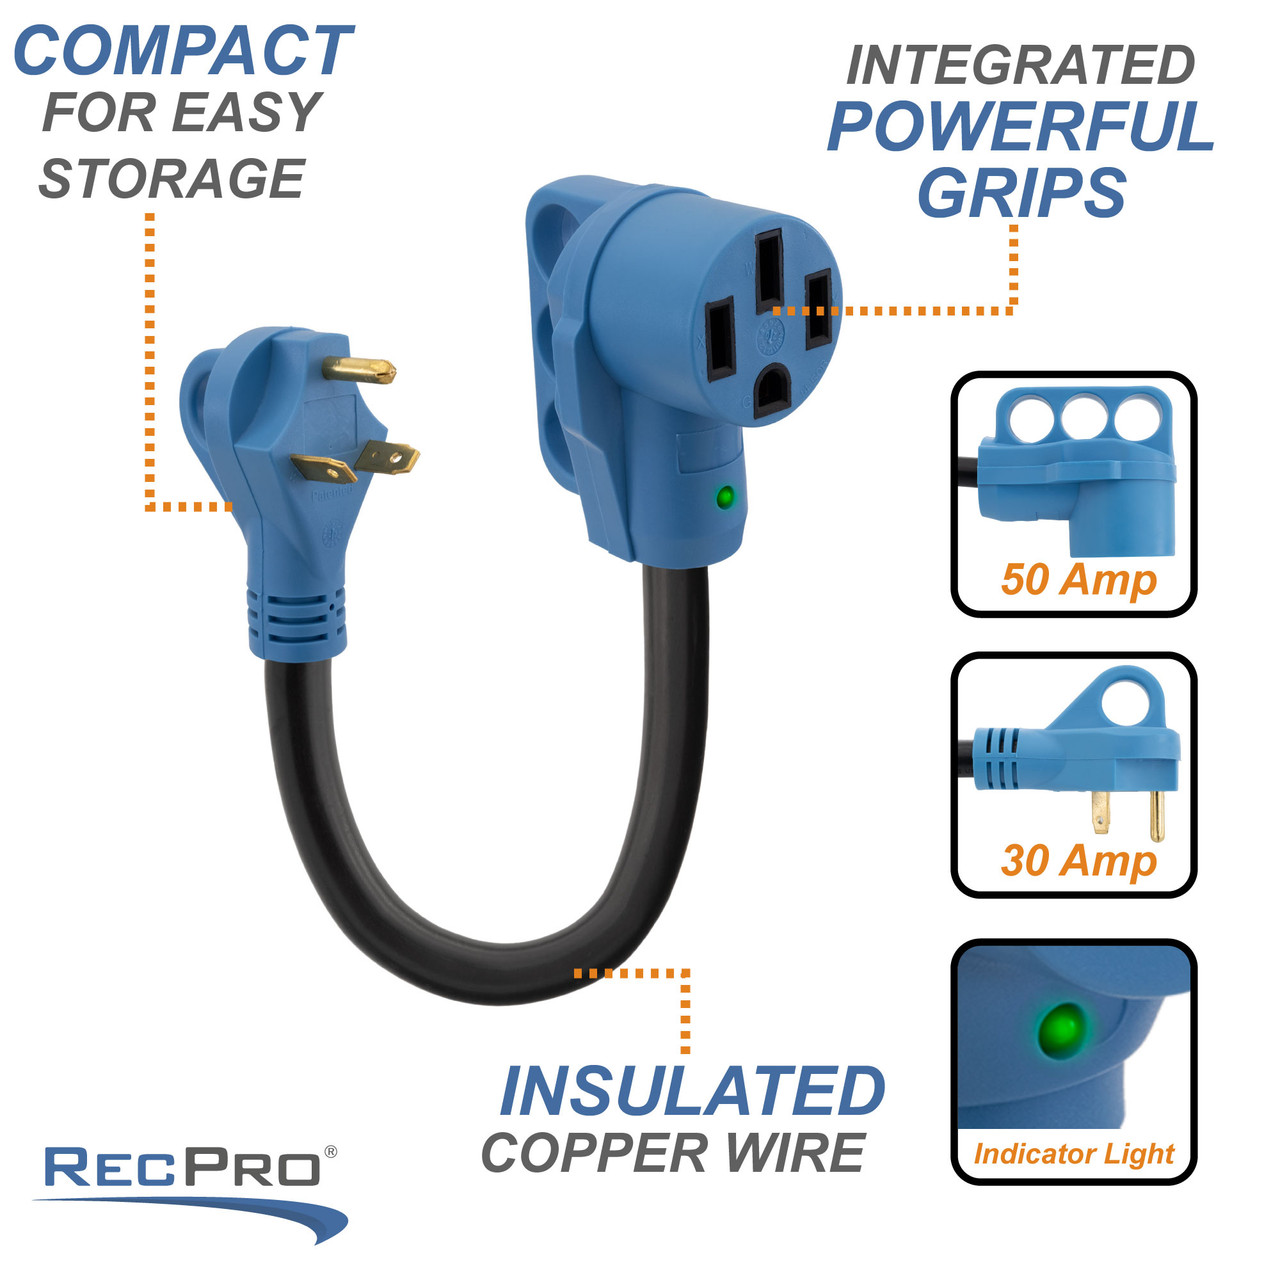 30 Amp Male to 50 Amp Female RV Power Adapter - RecPro